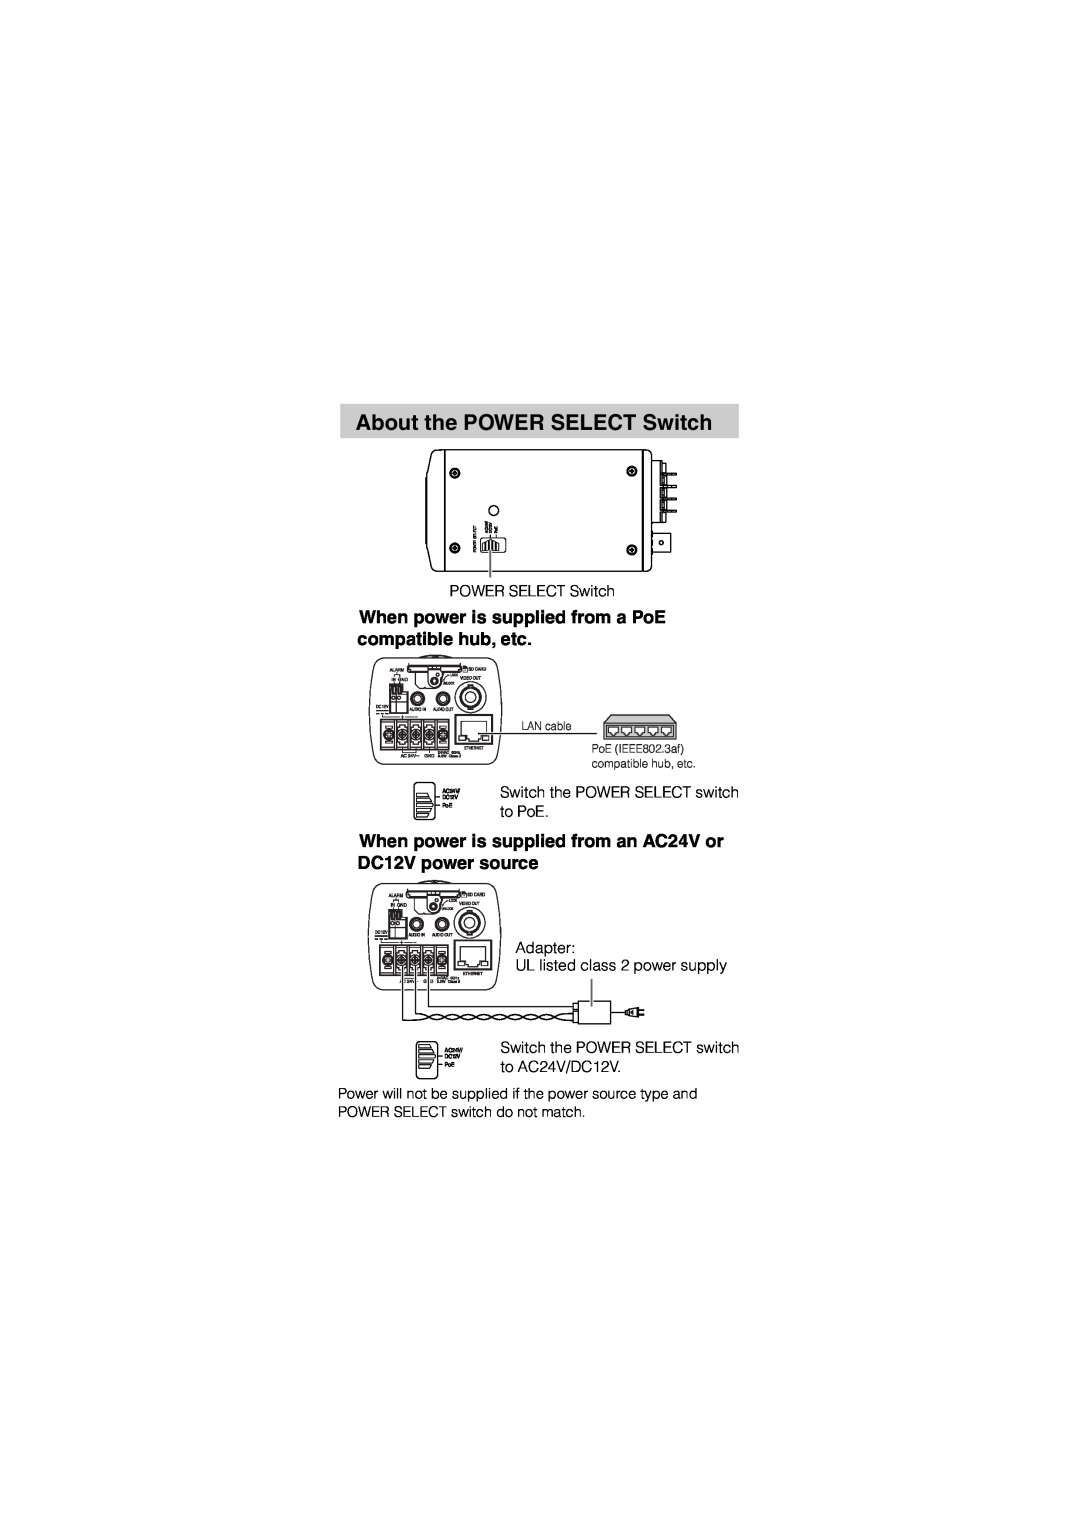 Toshiba IK-WB02A manual About the POWER SELECT Switch, When power is supplied from an AC24V or, DC12V power source 